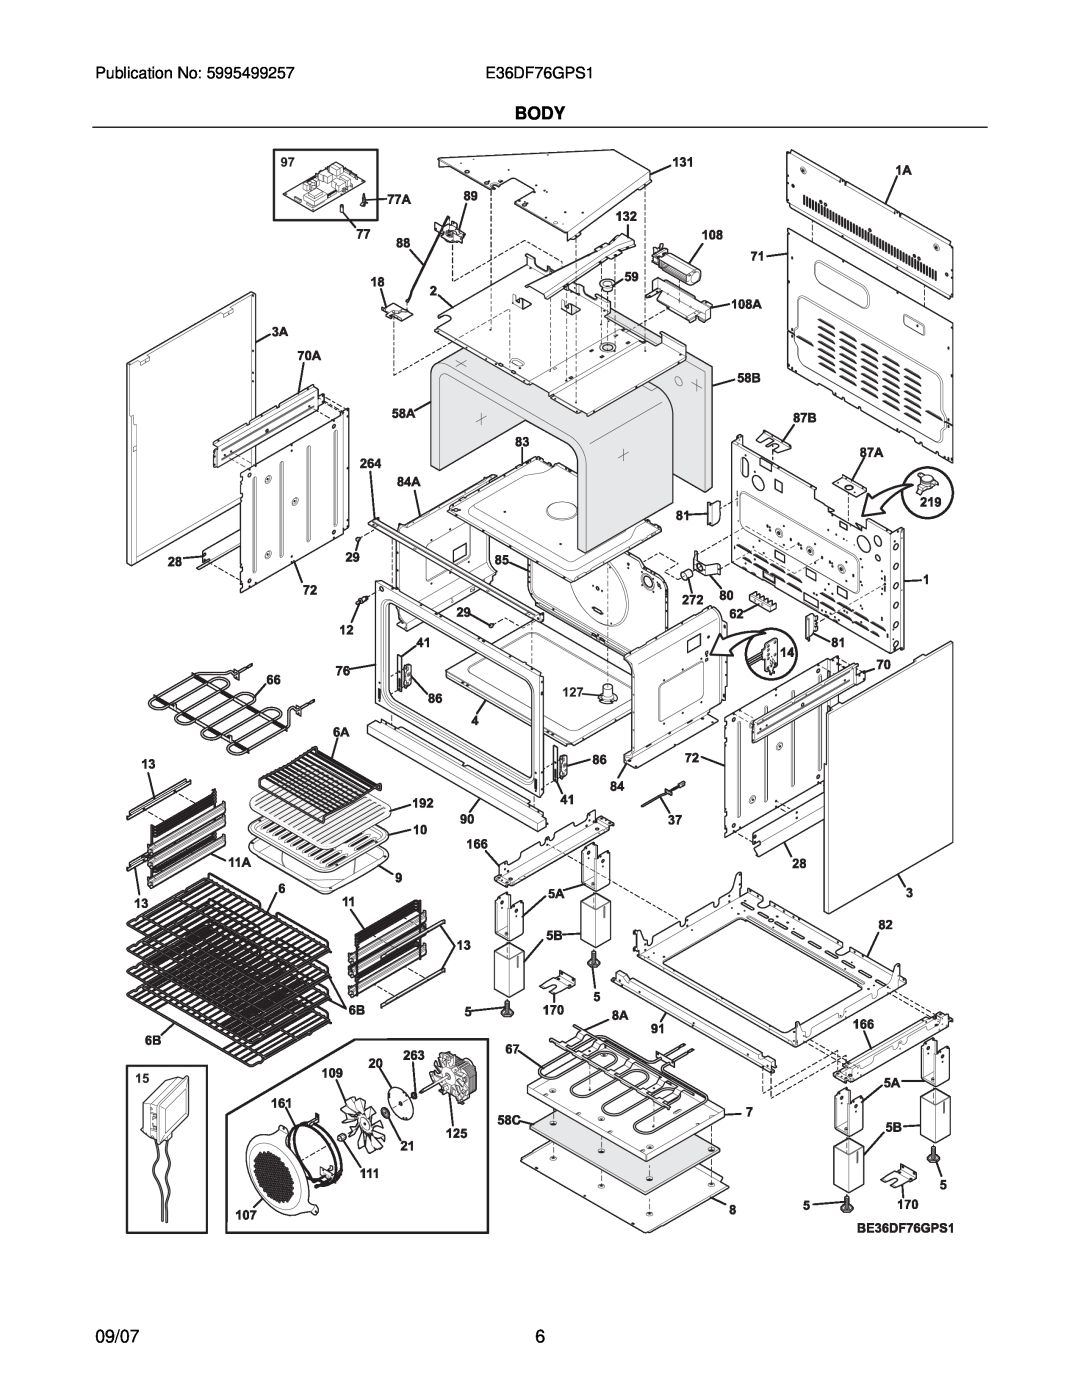 Electrolux E36DF76GPS1, 30166673P70S1 installation instructions Body, 09/07 